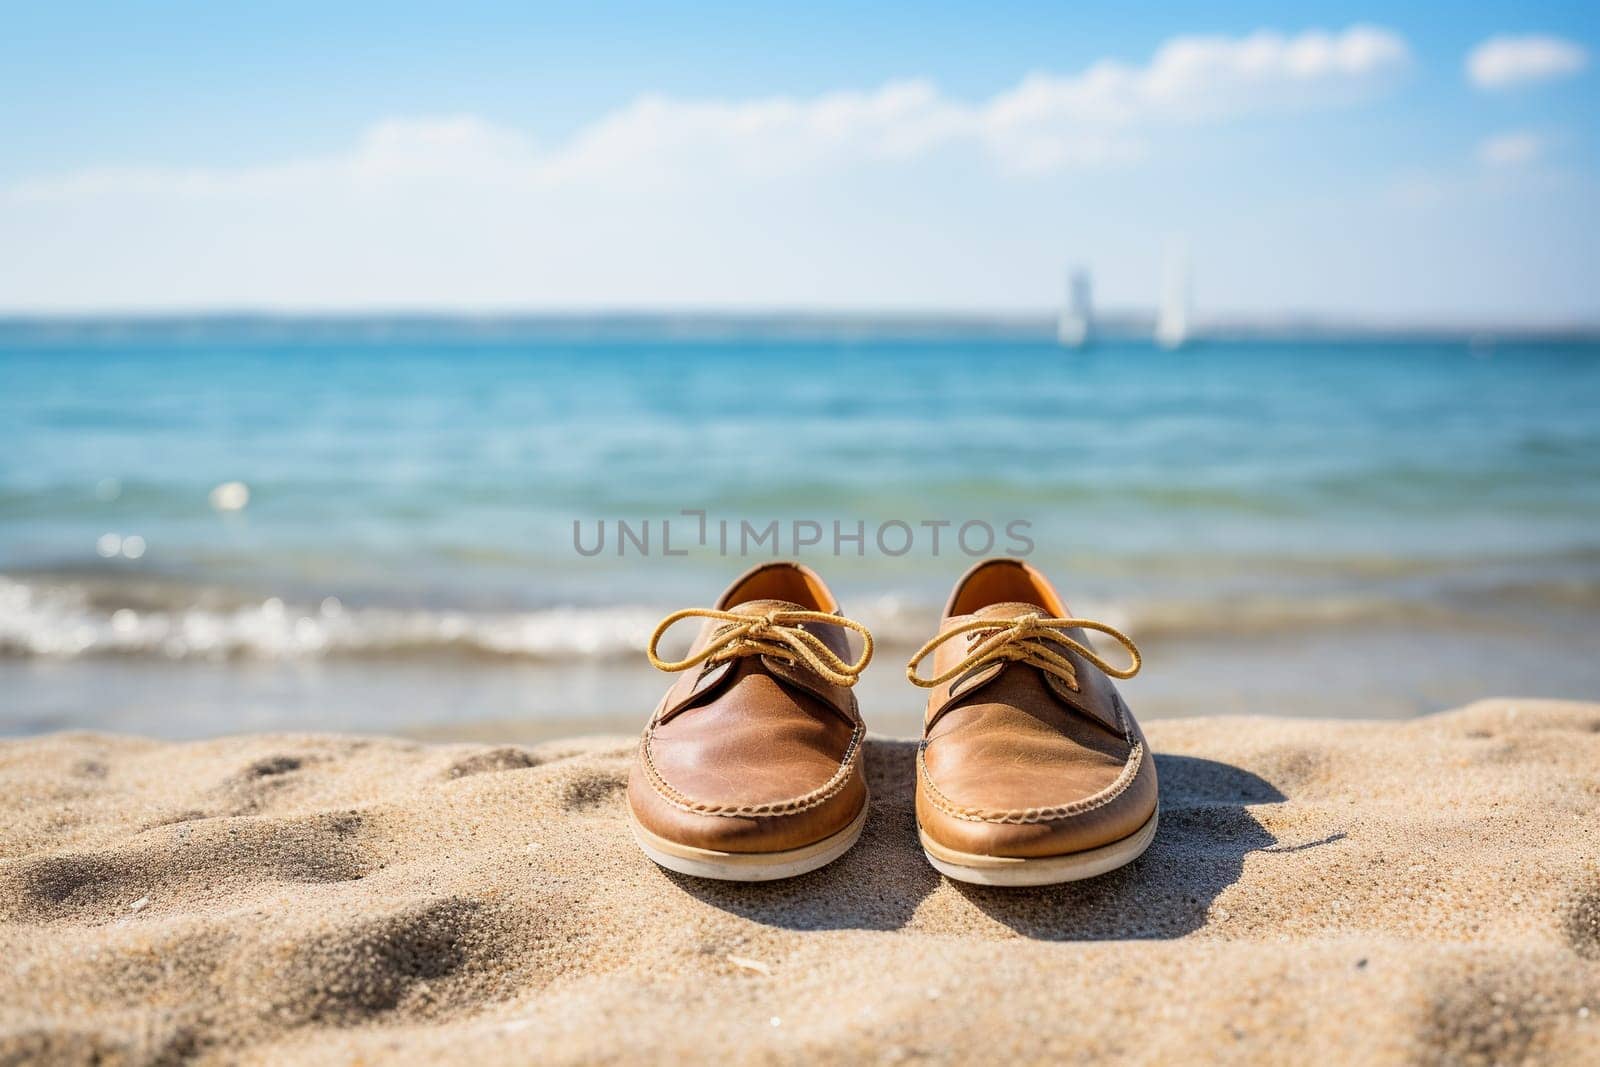 Men's shoes on the sand on the beach near the blue sea. Summer vacation concept by the sea.